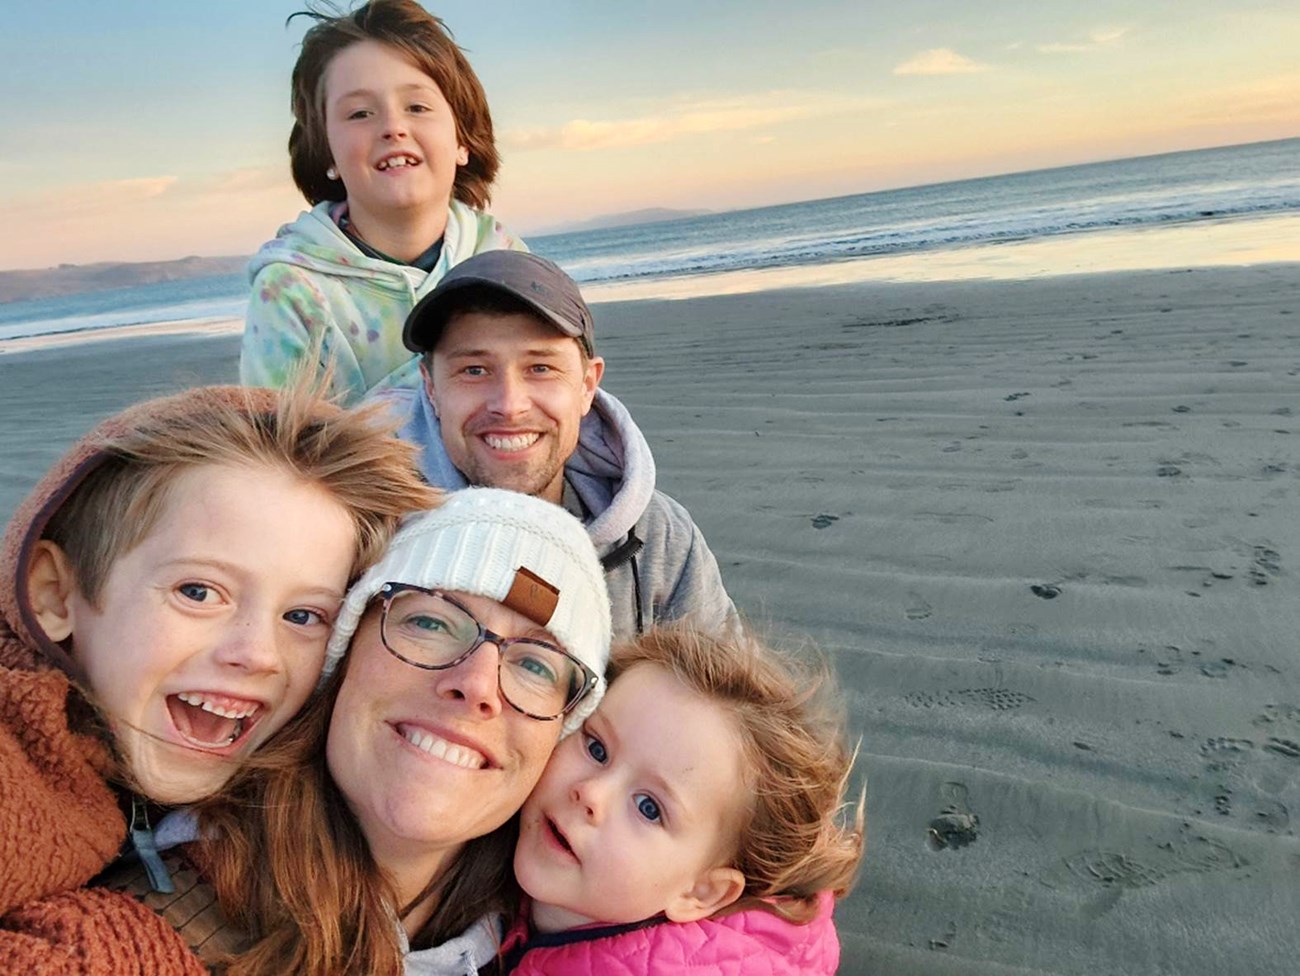 Rachel in a selfie with her husband and three children at the beach, all bundled in warm clothing.